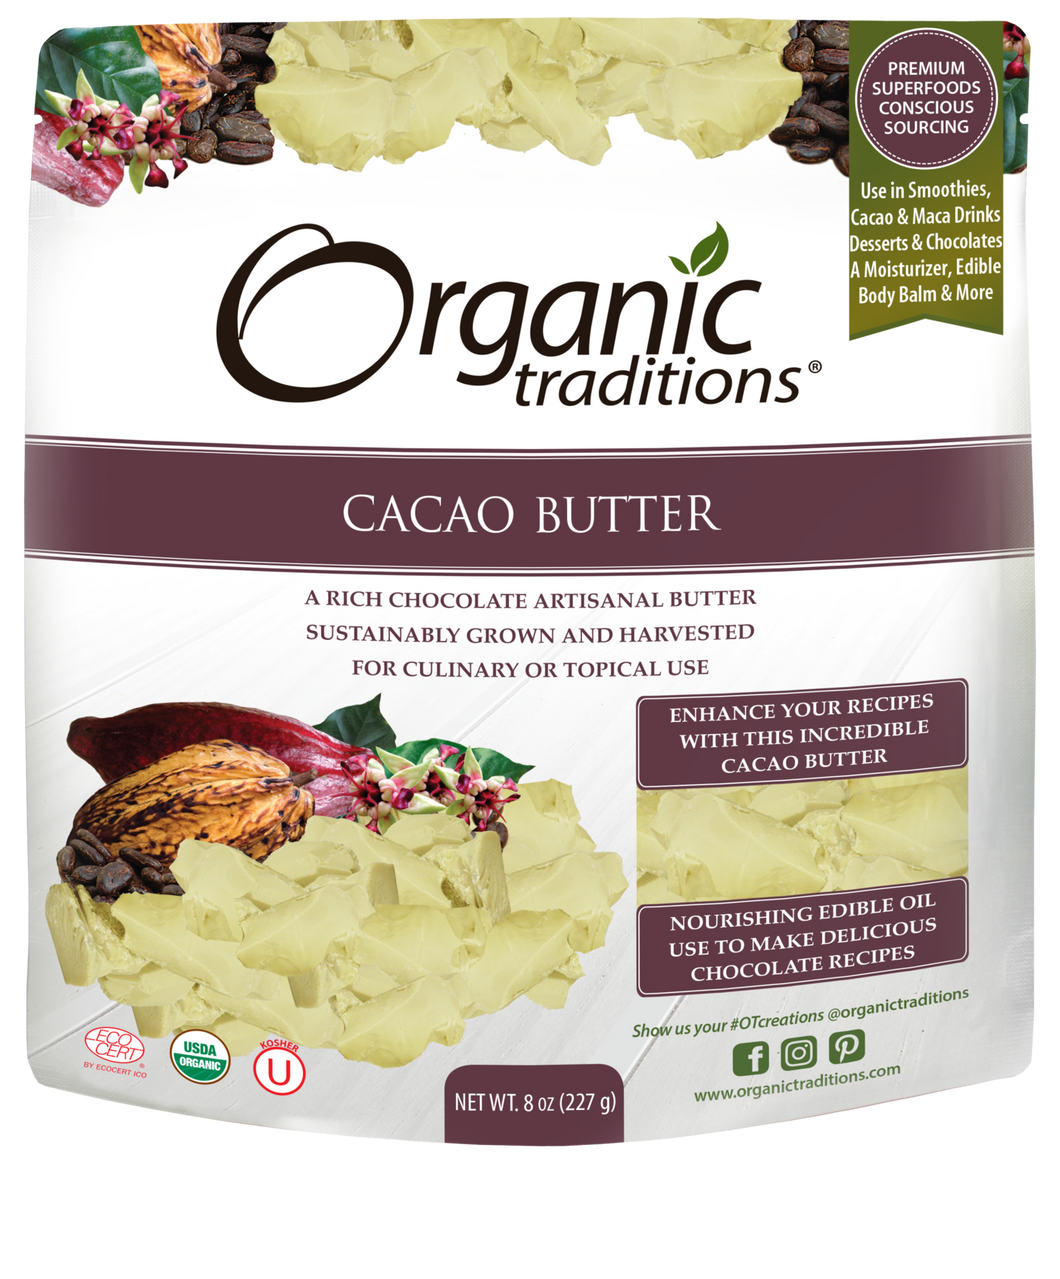 Organic Traditions Organic Cacao Butter 454g